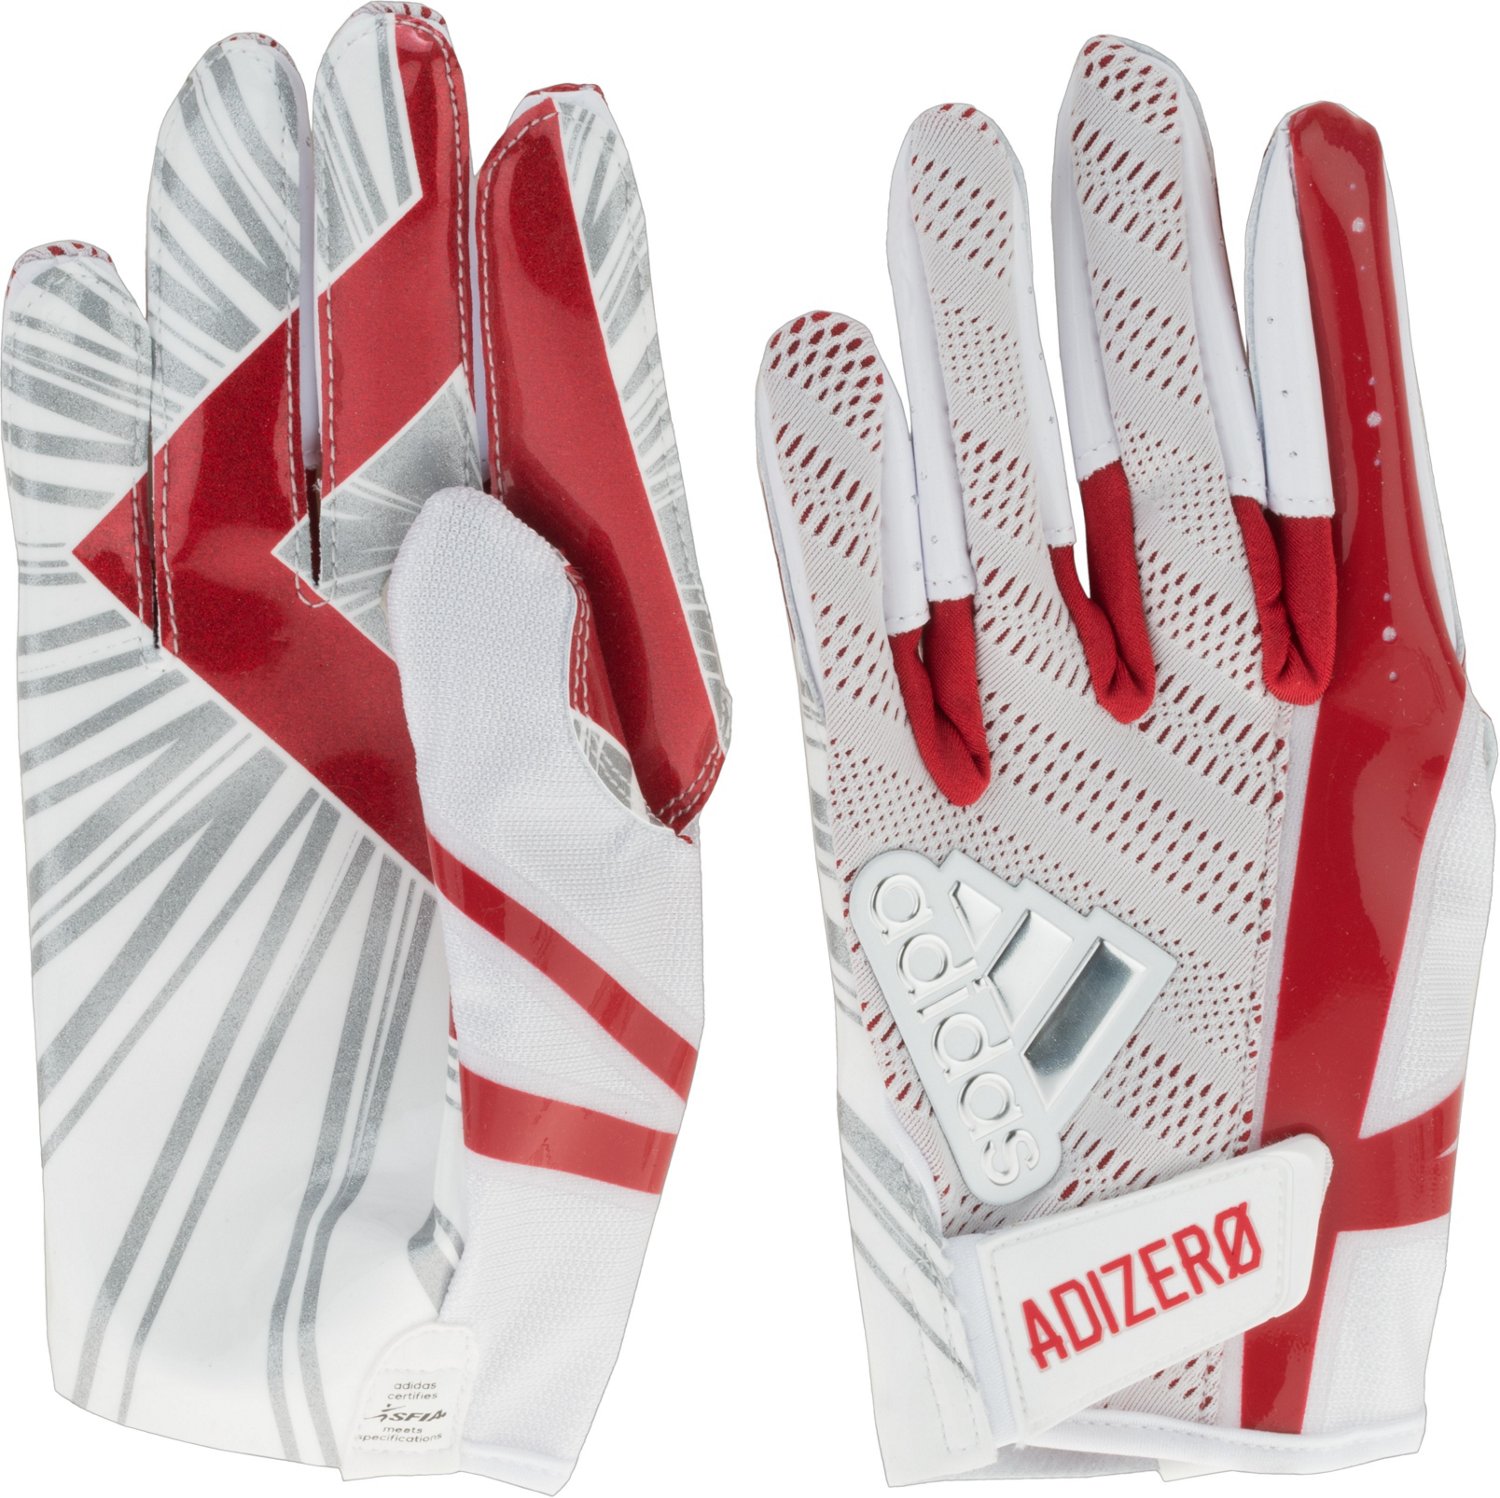 red and white football gloves